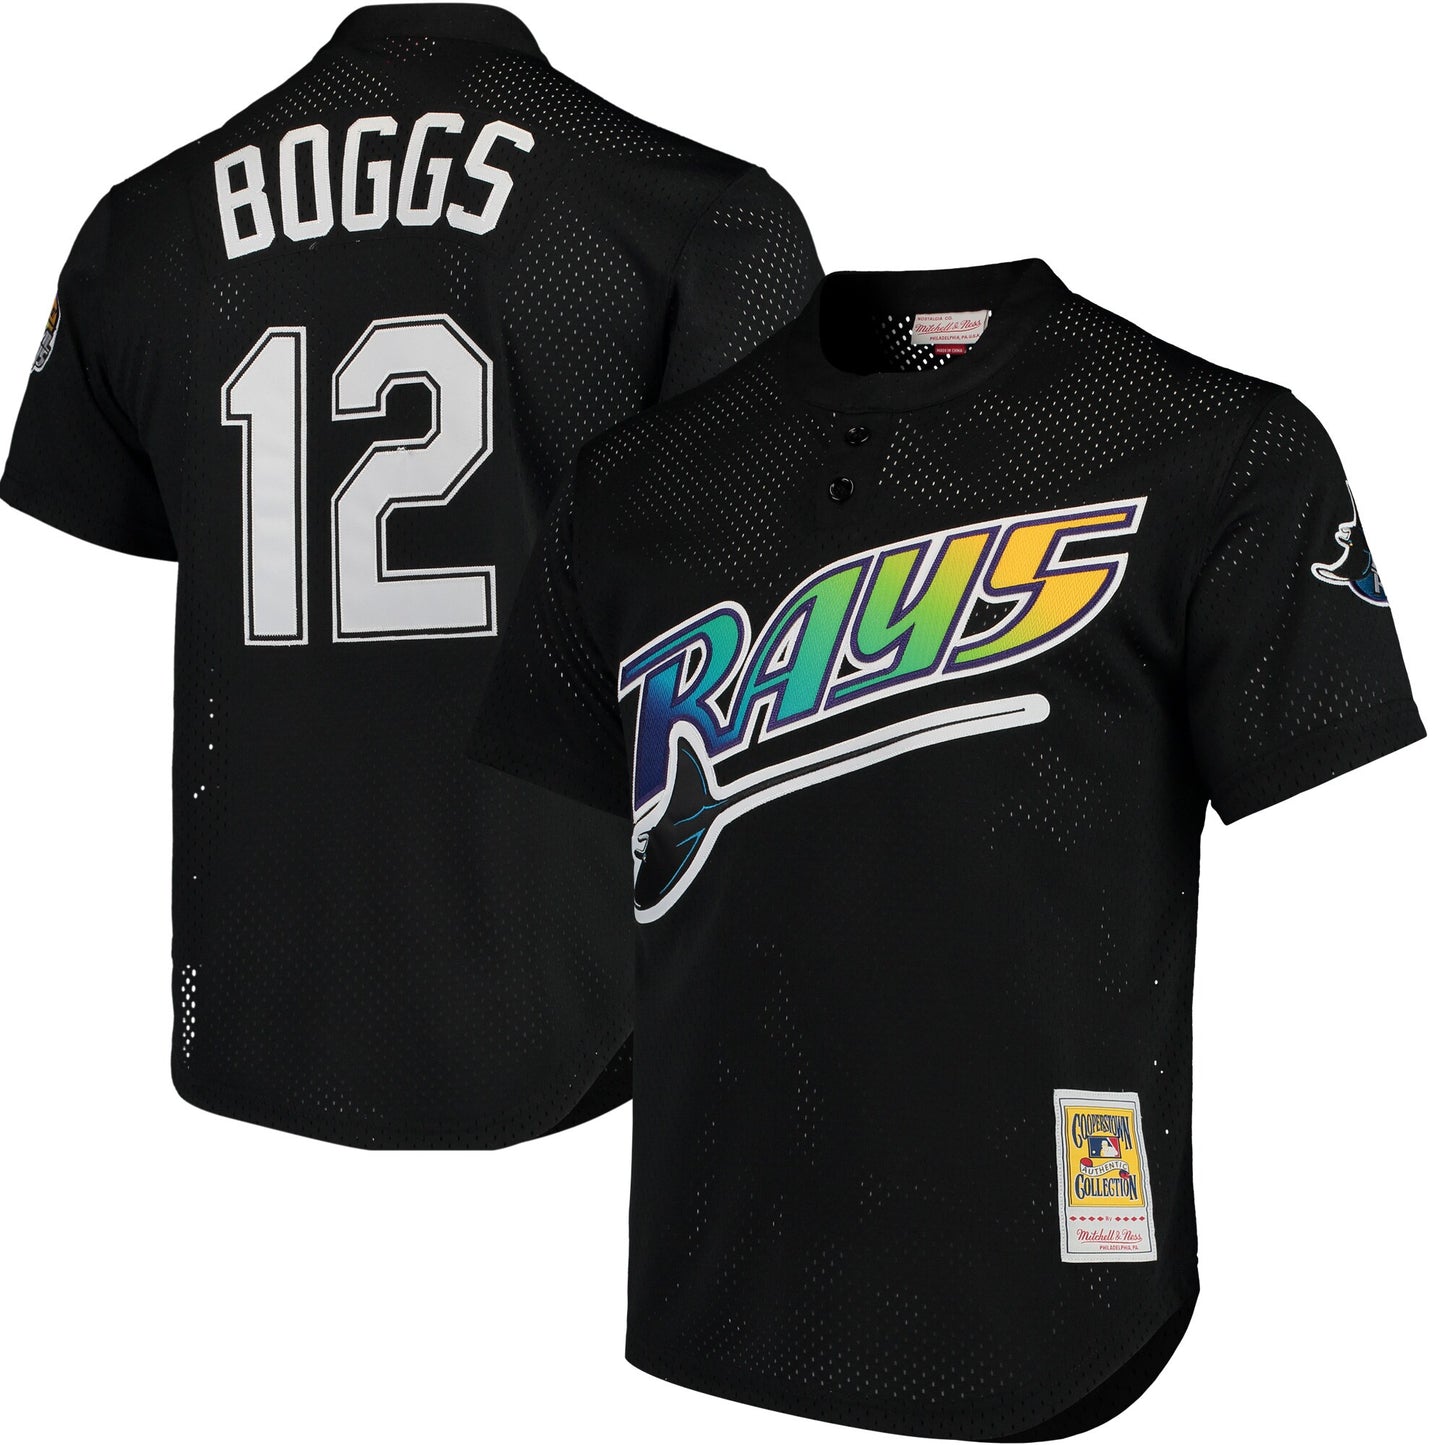 Wade Boggs Tampa Bay Rays Mitchell & Ness Cooperstown Collection 1991 Mesh Batting Practice Jersey - Black